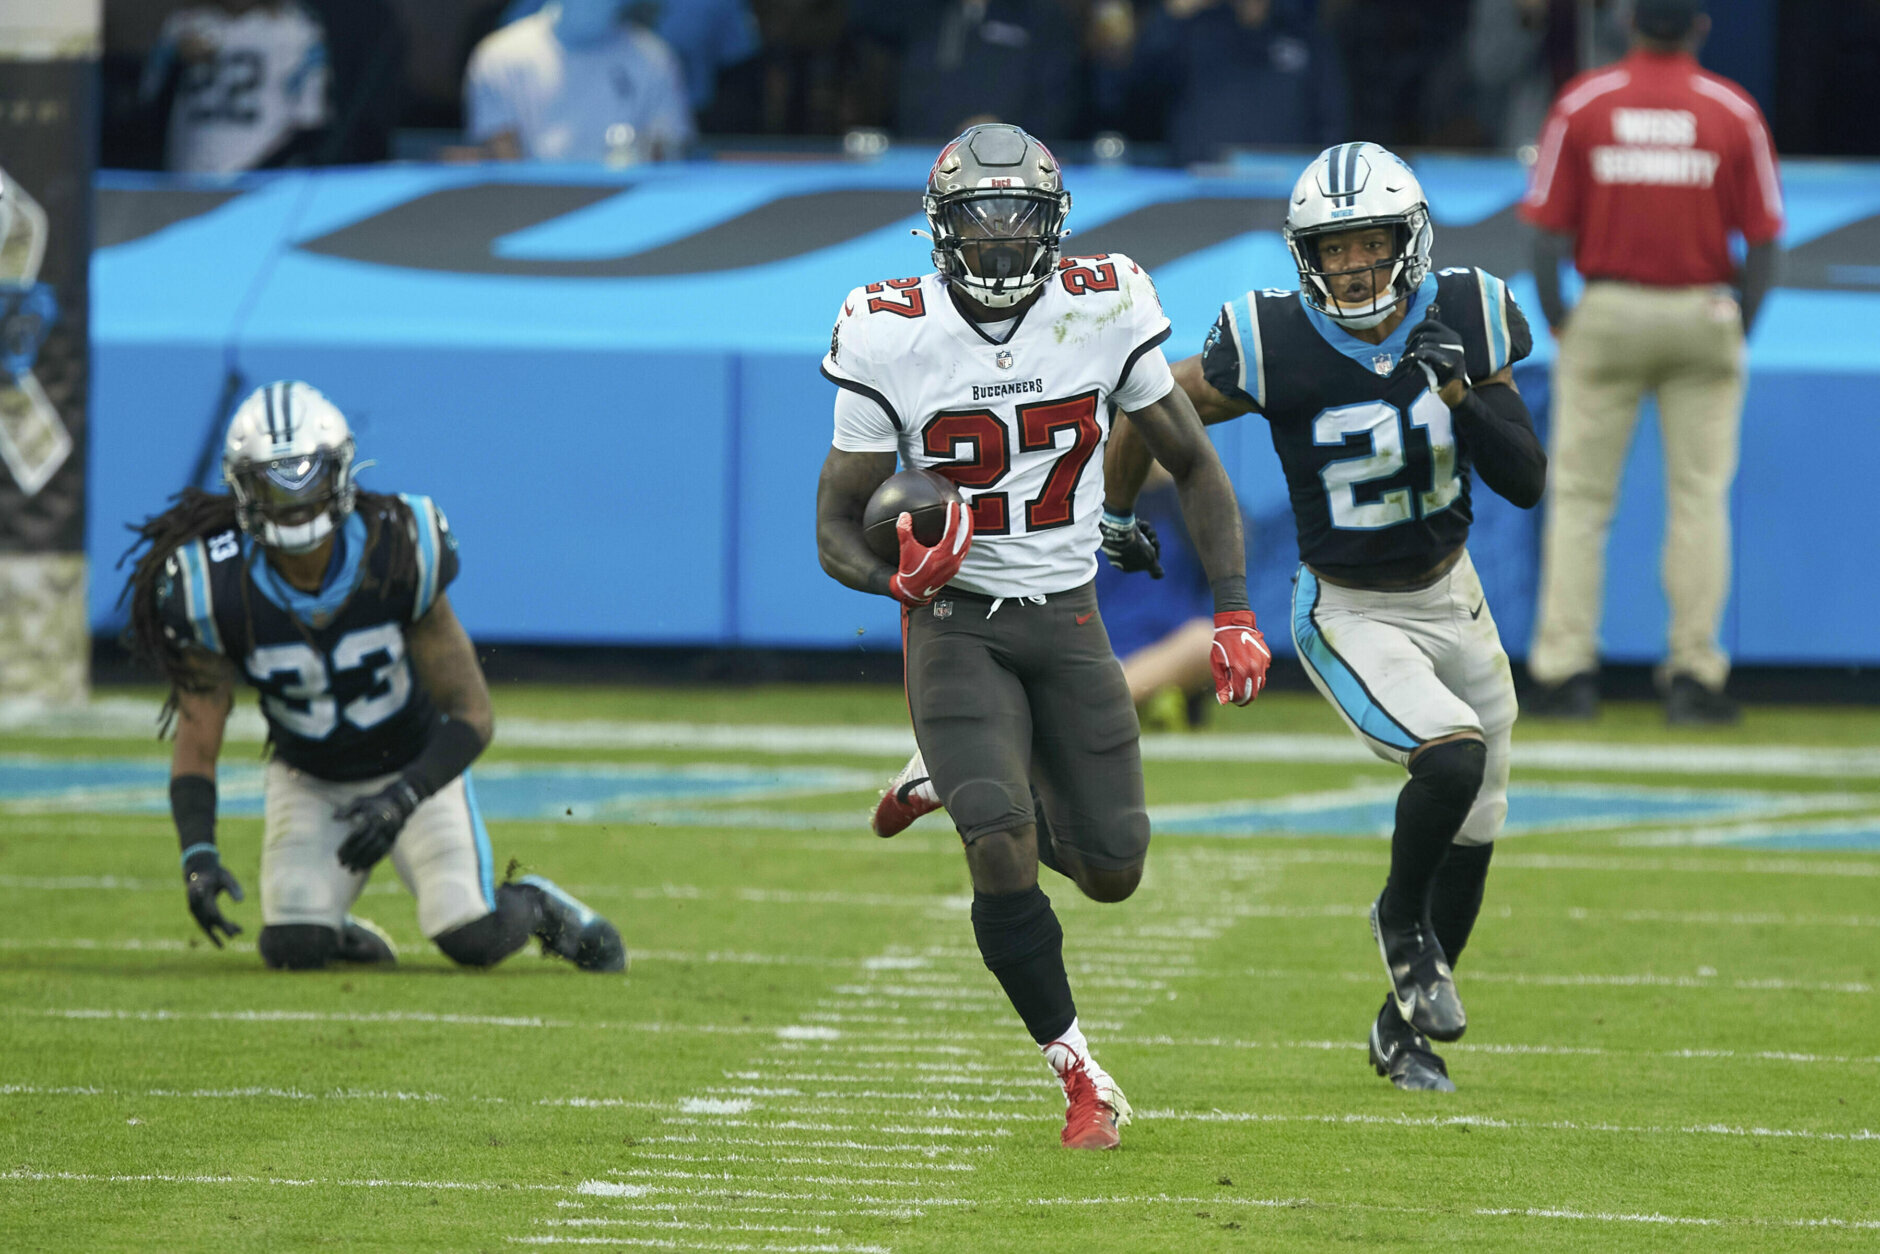 <p><b><i>Bucs 46</i></b><br />
<b><i>Panthers 23</i></b></p>
<p>Tampa Bay followed up a blowout loss featuring the fewest rush attempts in history with a blowout win highlighted by a 210-yard rushing effort to complement Tom Brady&#8217;s 341-yard, 3-TD rebound. Did I mention one-handed <a href="https://twitter.com/Buccaneers/status/1328068272844132354?s=20">JPP got a pick</a>?! Not bad for a team <a href="https://profootballtalk.nbcsports.com/2020/11/15/buccaneers-arrived-in-carolina-after-seven-hour-delay/">literally playing on short rest</a>.</p>
